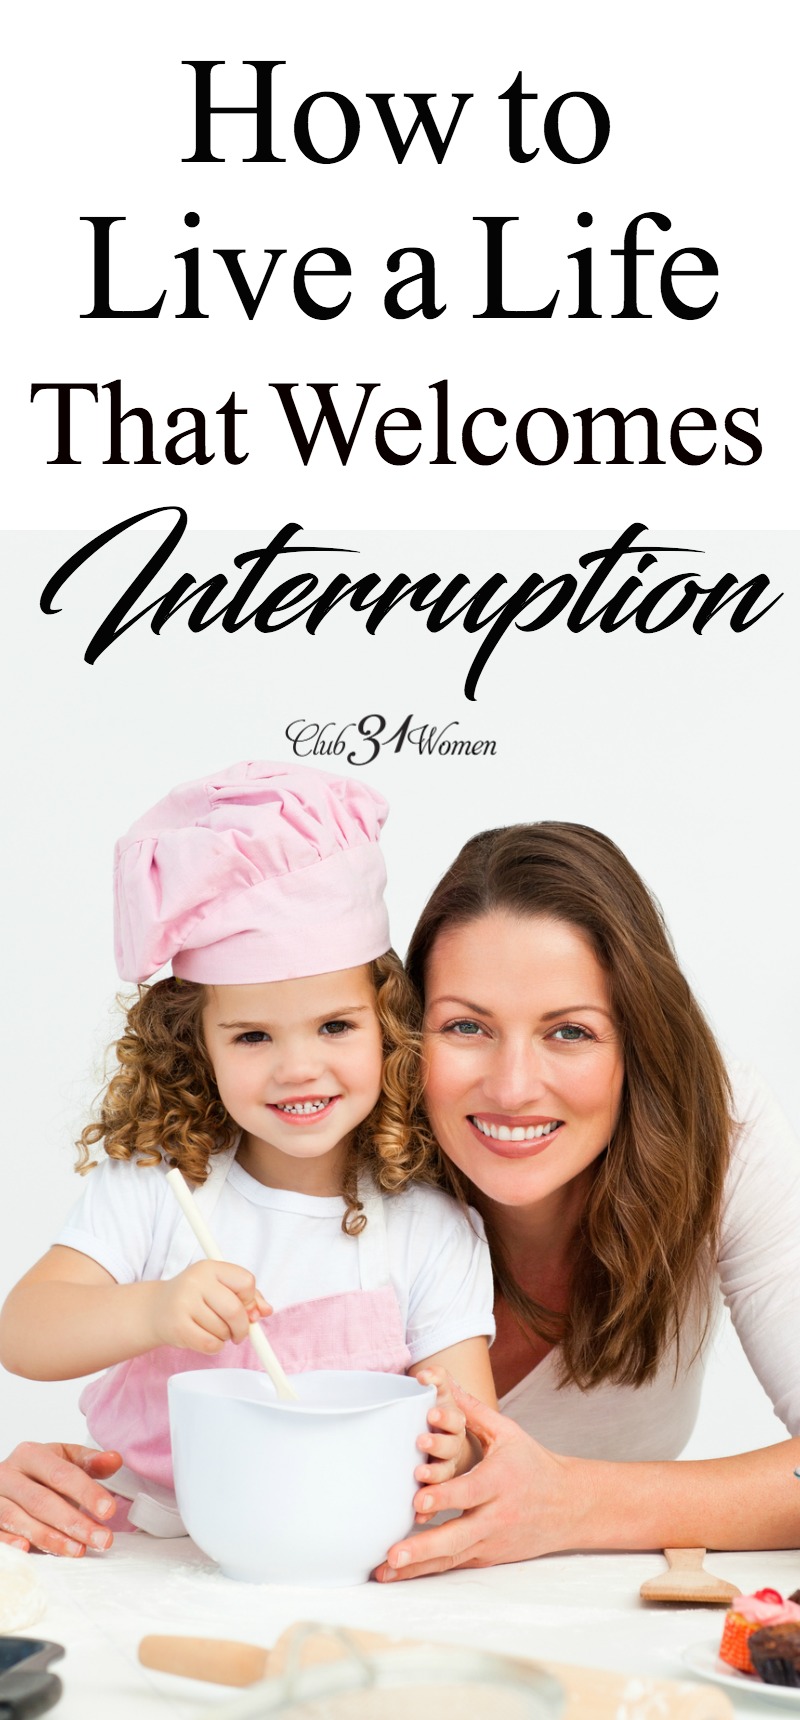 What if the seeming interruptions in my day are not a distraction from the greater purpose? What if the distractions are my greatest purpose? via @Club31Women